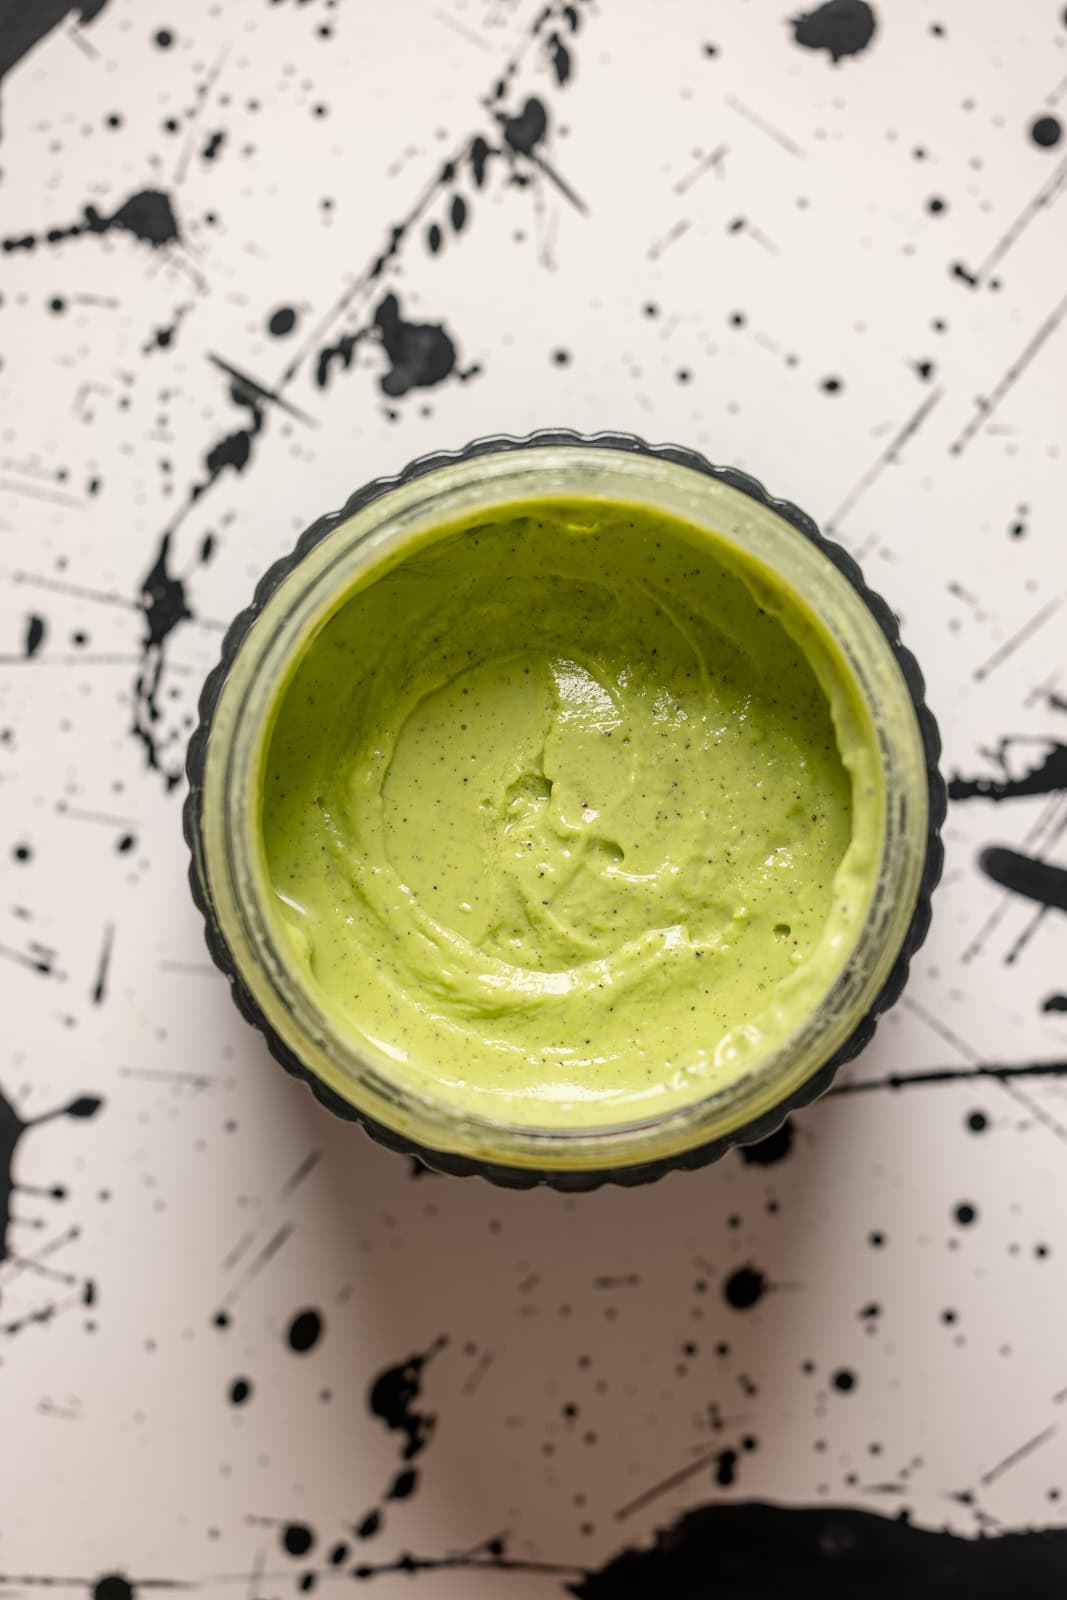 Green goddess sauce on a white table with black spots.